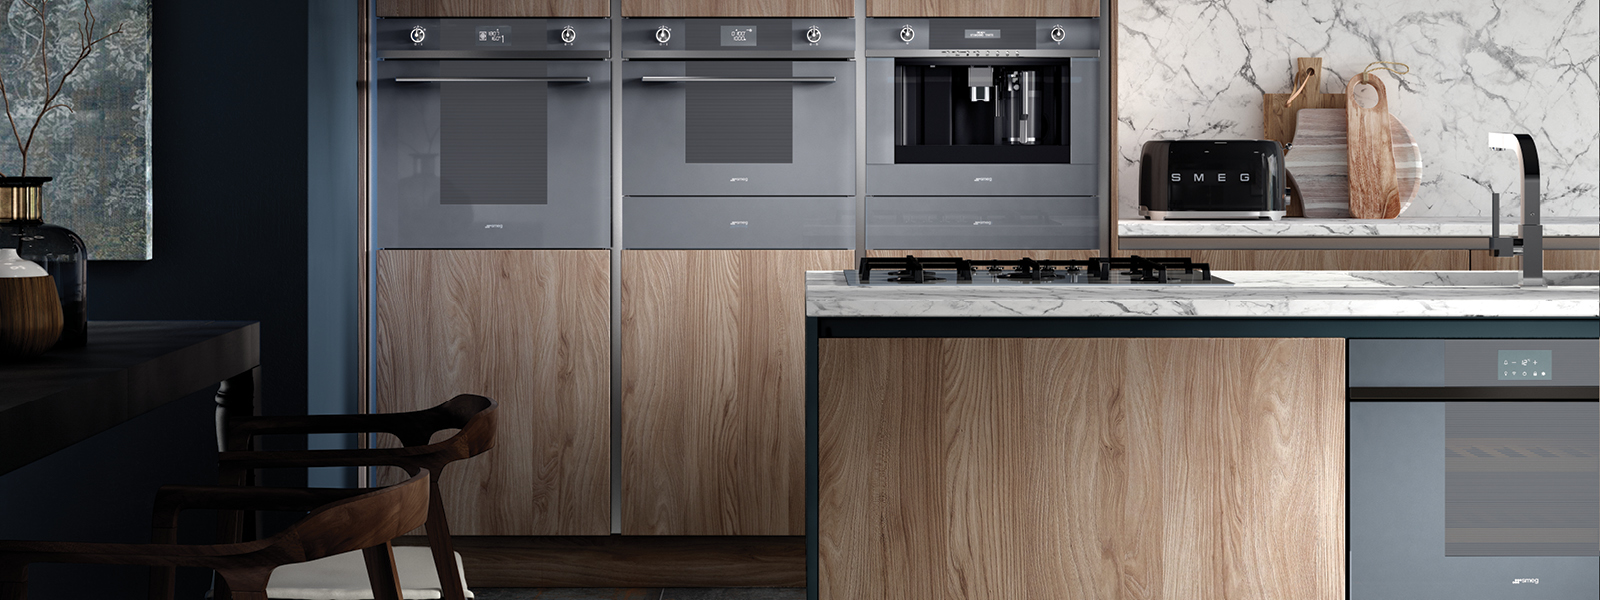 Bonus coffee pack with selected Smeg built-in Dolce Stil Novo or Linea coffee machine at Hart & Co